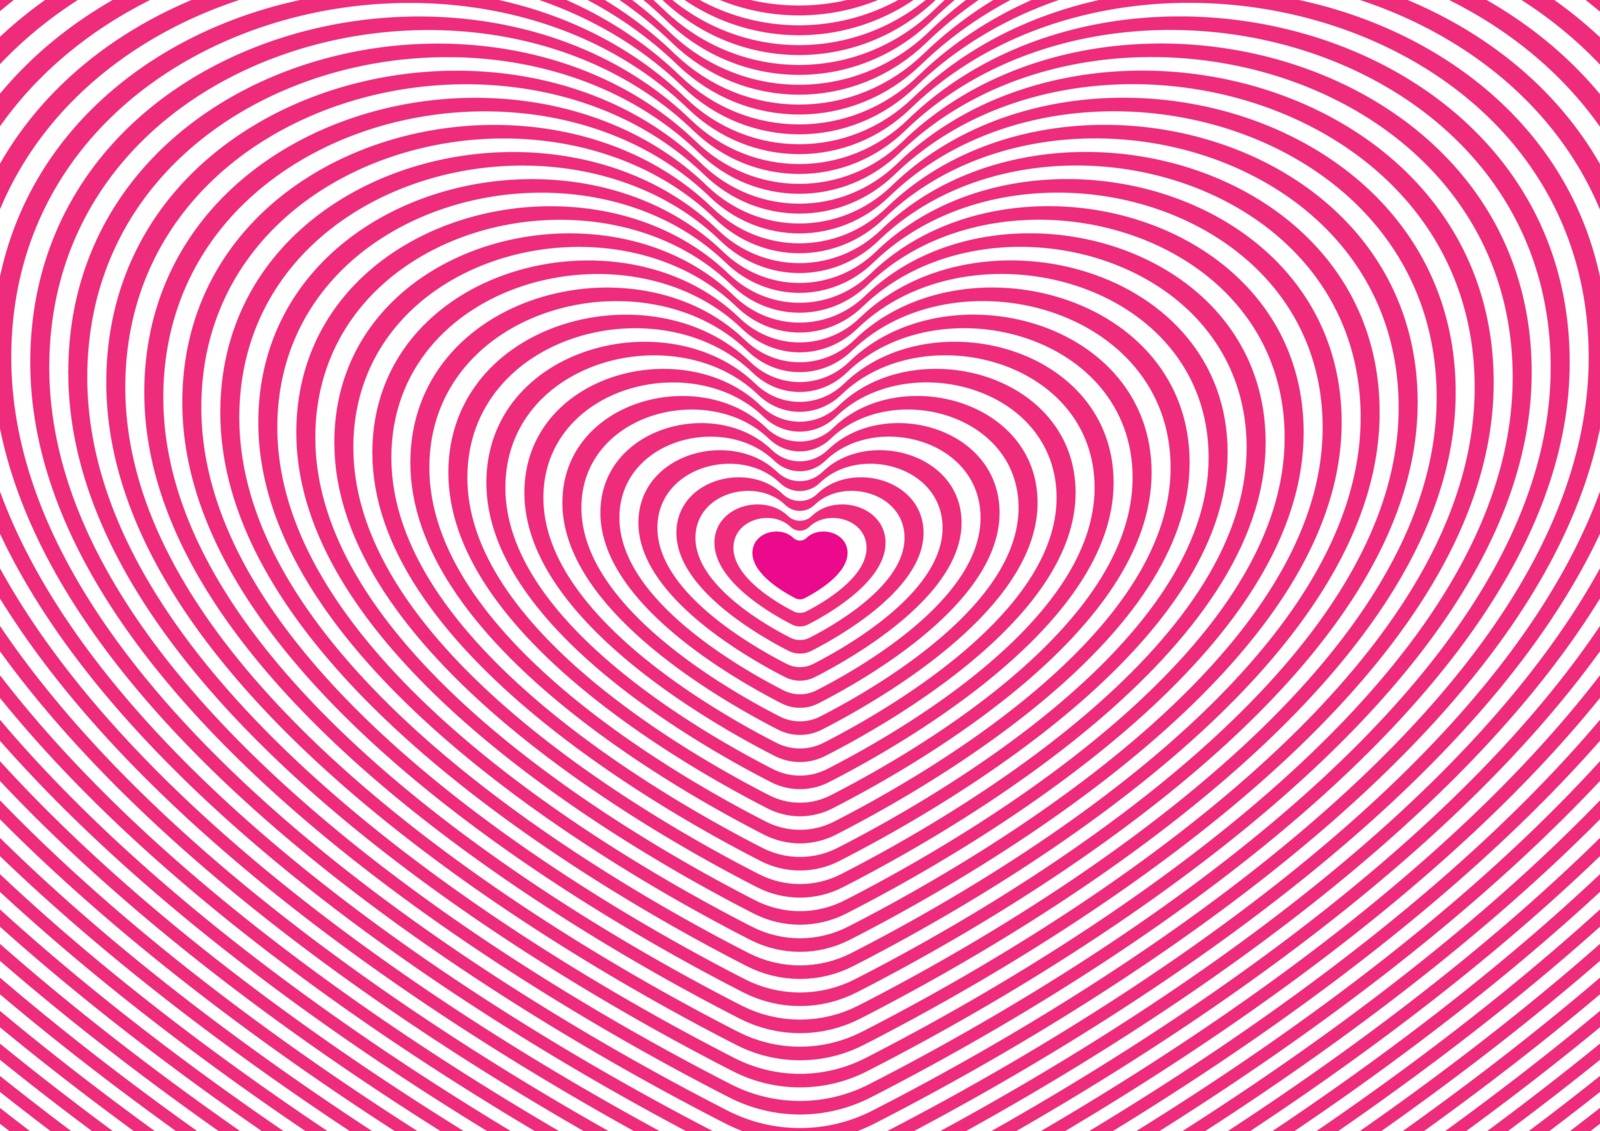 Pink and white heart tunnel wallpaper